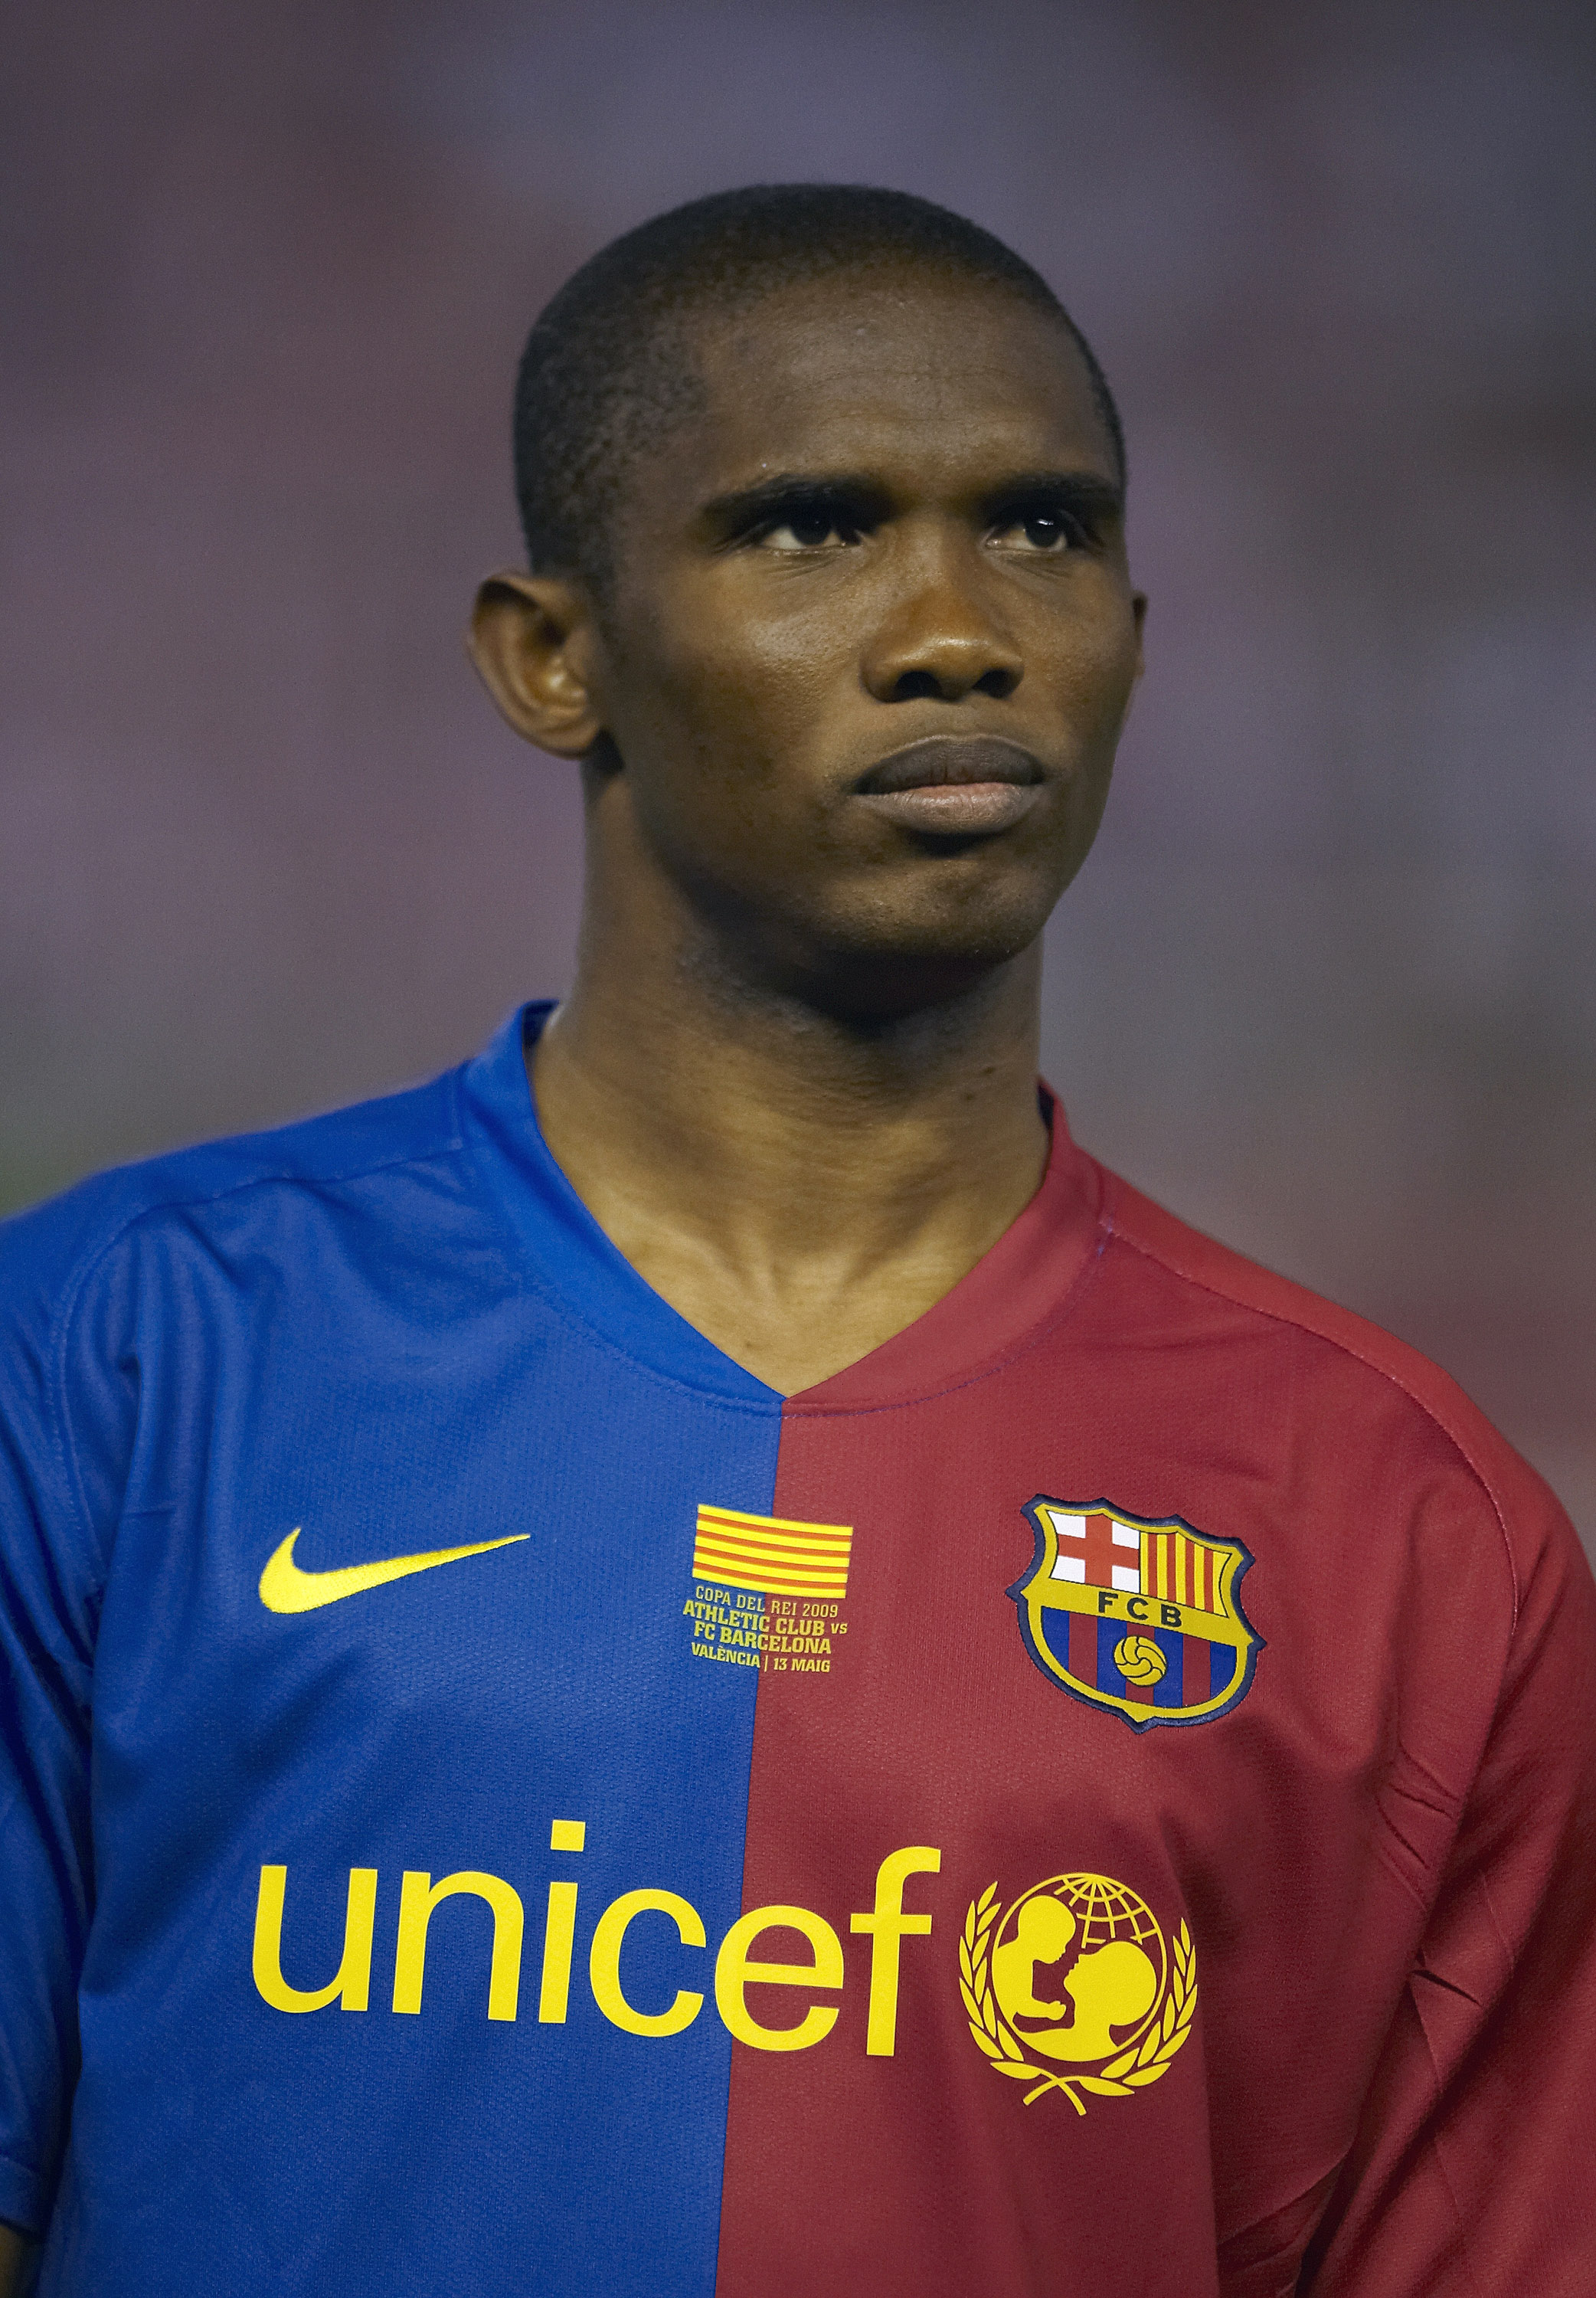 VALENCIA, SPAIN - MAY 13:  Samuel Eto'o of Barcelona looks on before the Copa del Rey final match between Barcelona and Athletic Bilbao at the Mestalla stadium on May 13, 2009 in Valencia, Spain. Barcelona won 4-1.  (Photo by Manuel Queimadelos Alonso/Get